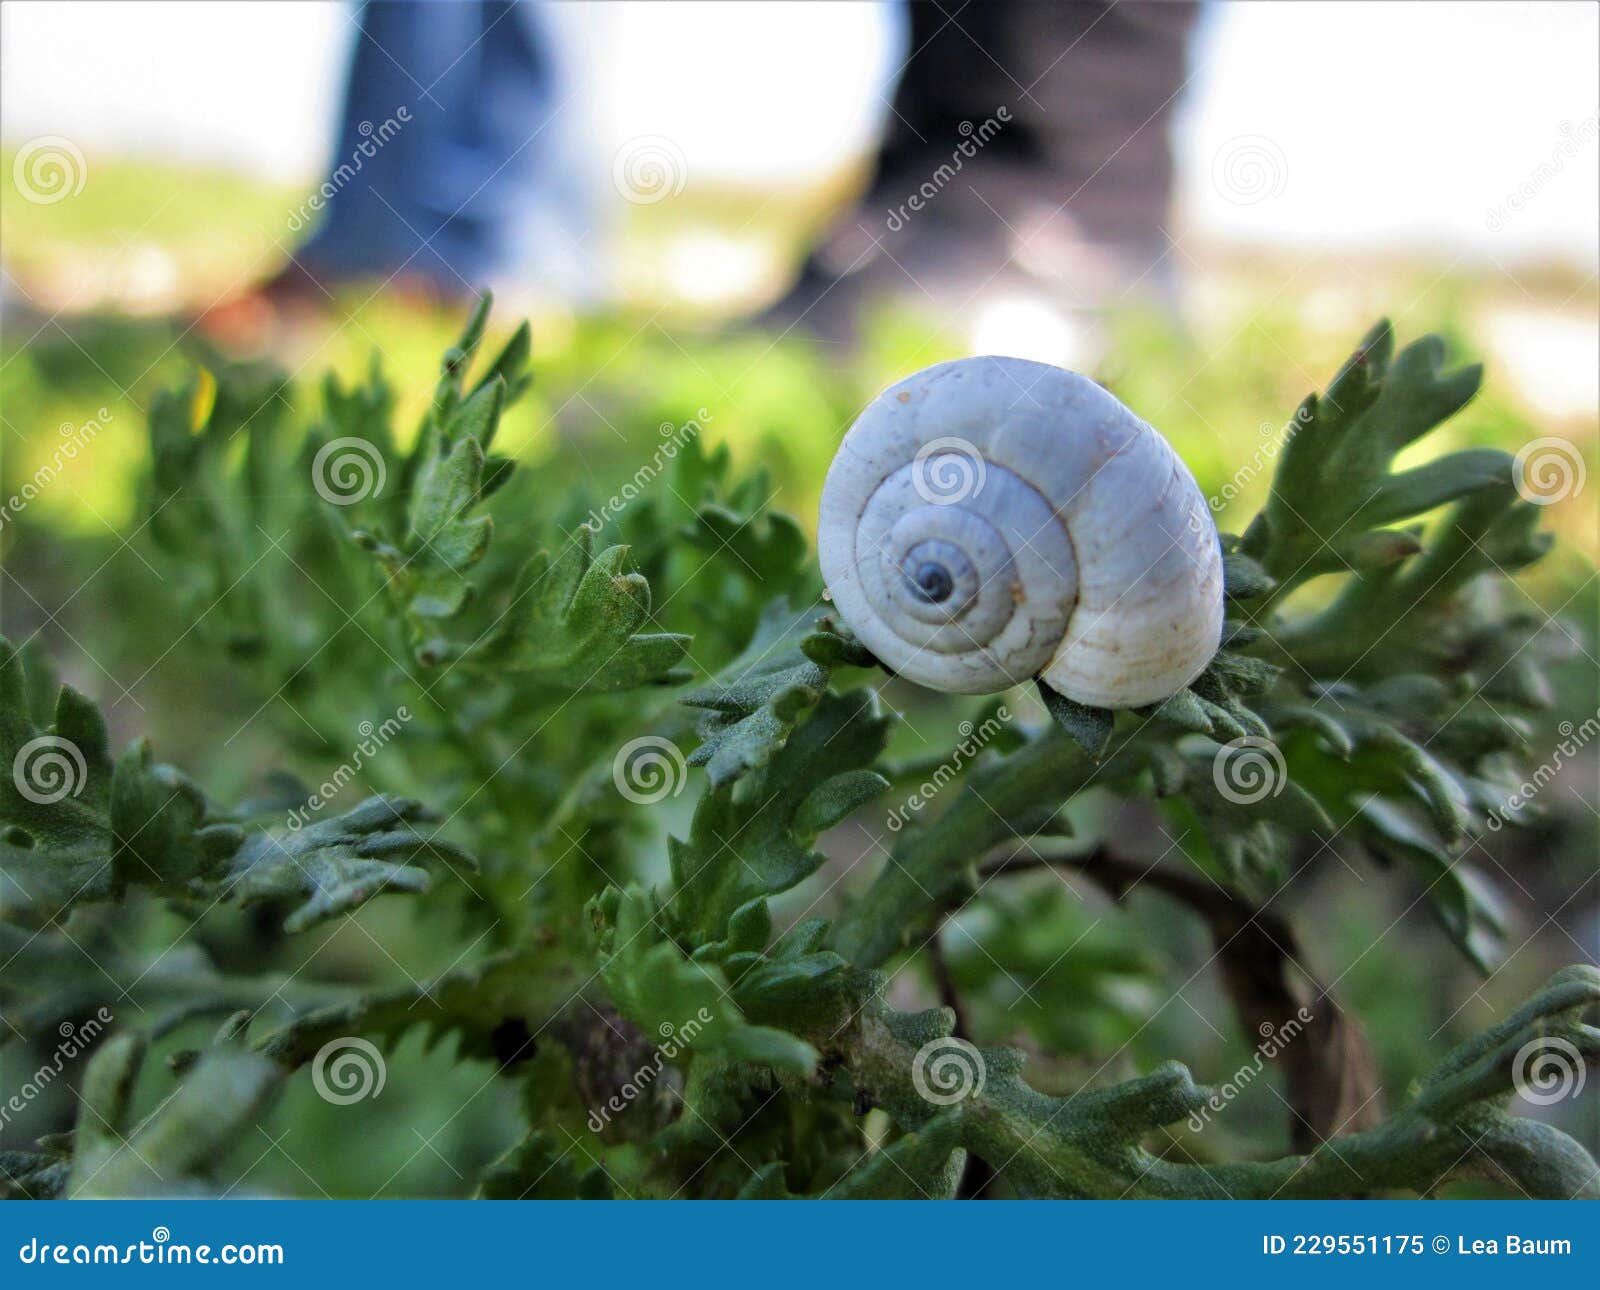 A snail house on the plant stock image. Image of crawls - 229551175